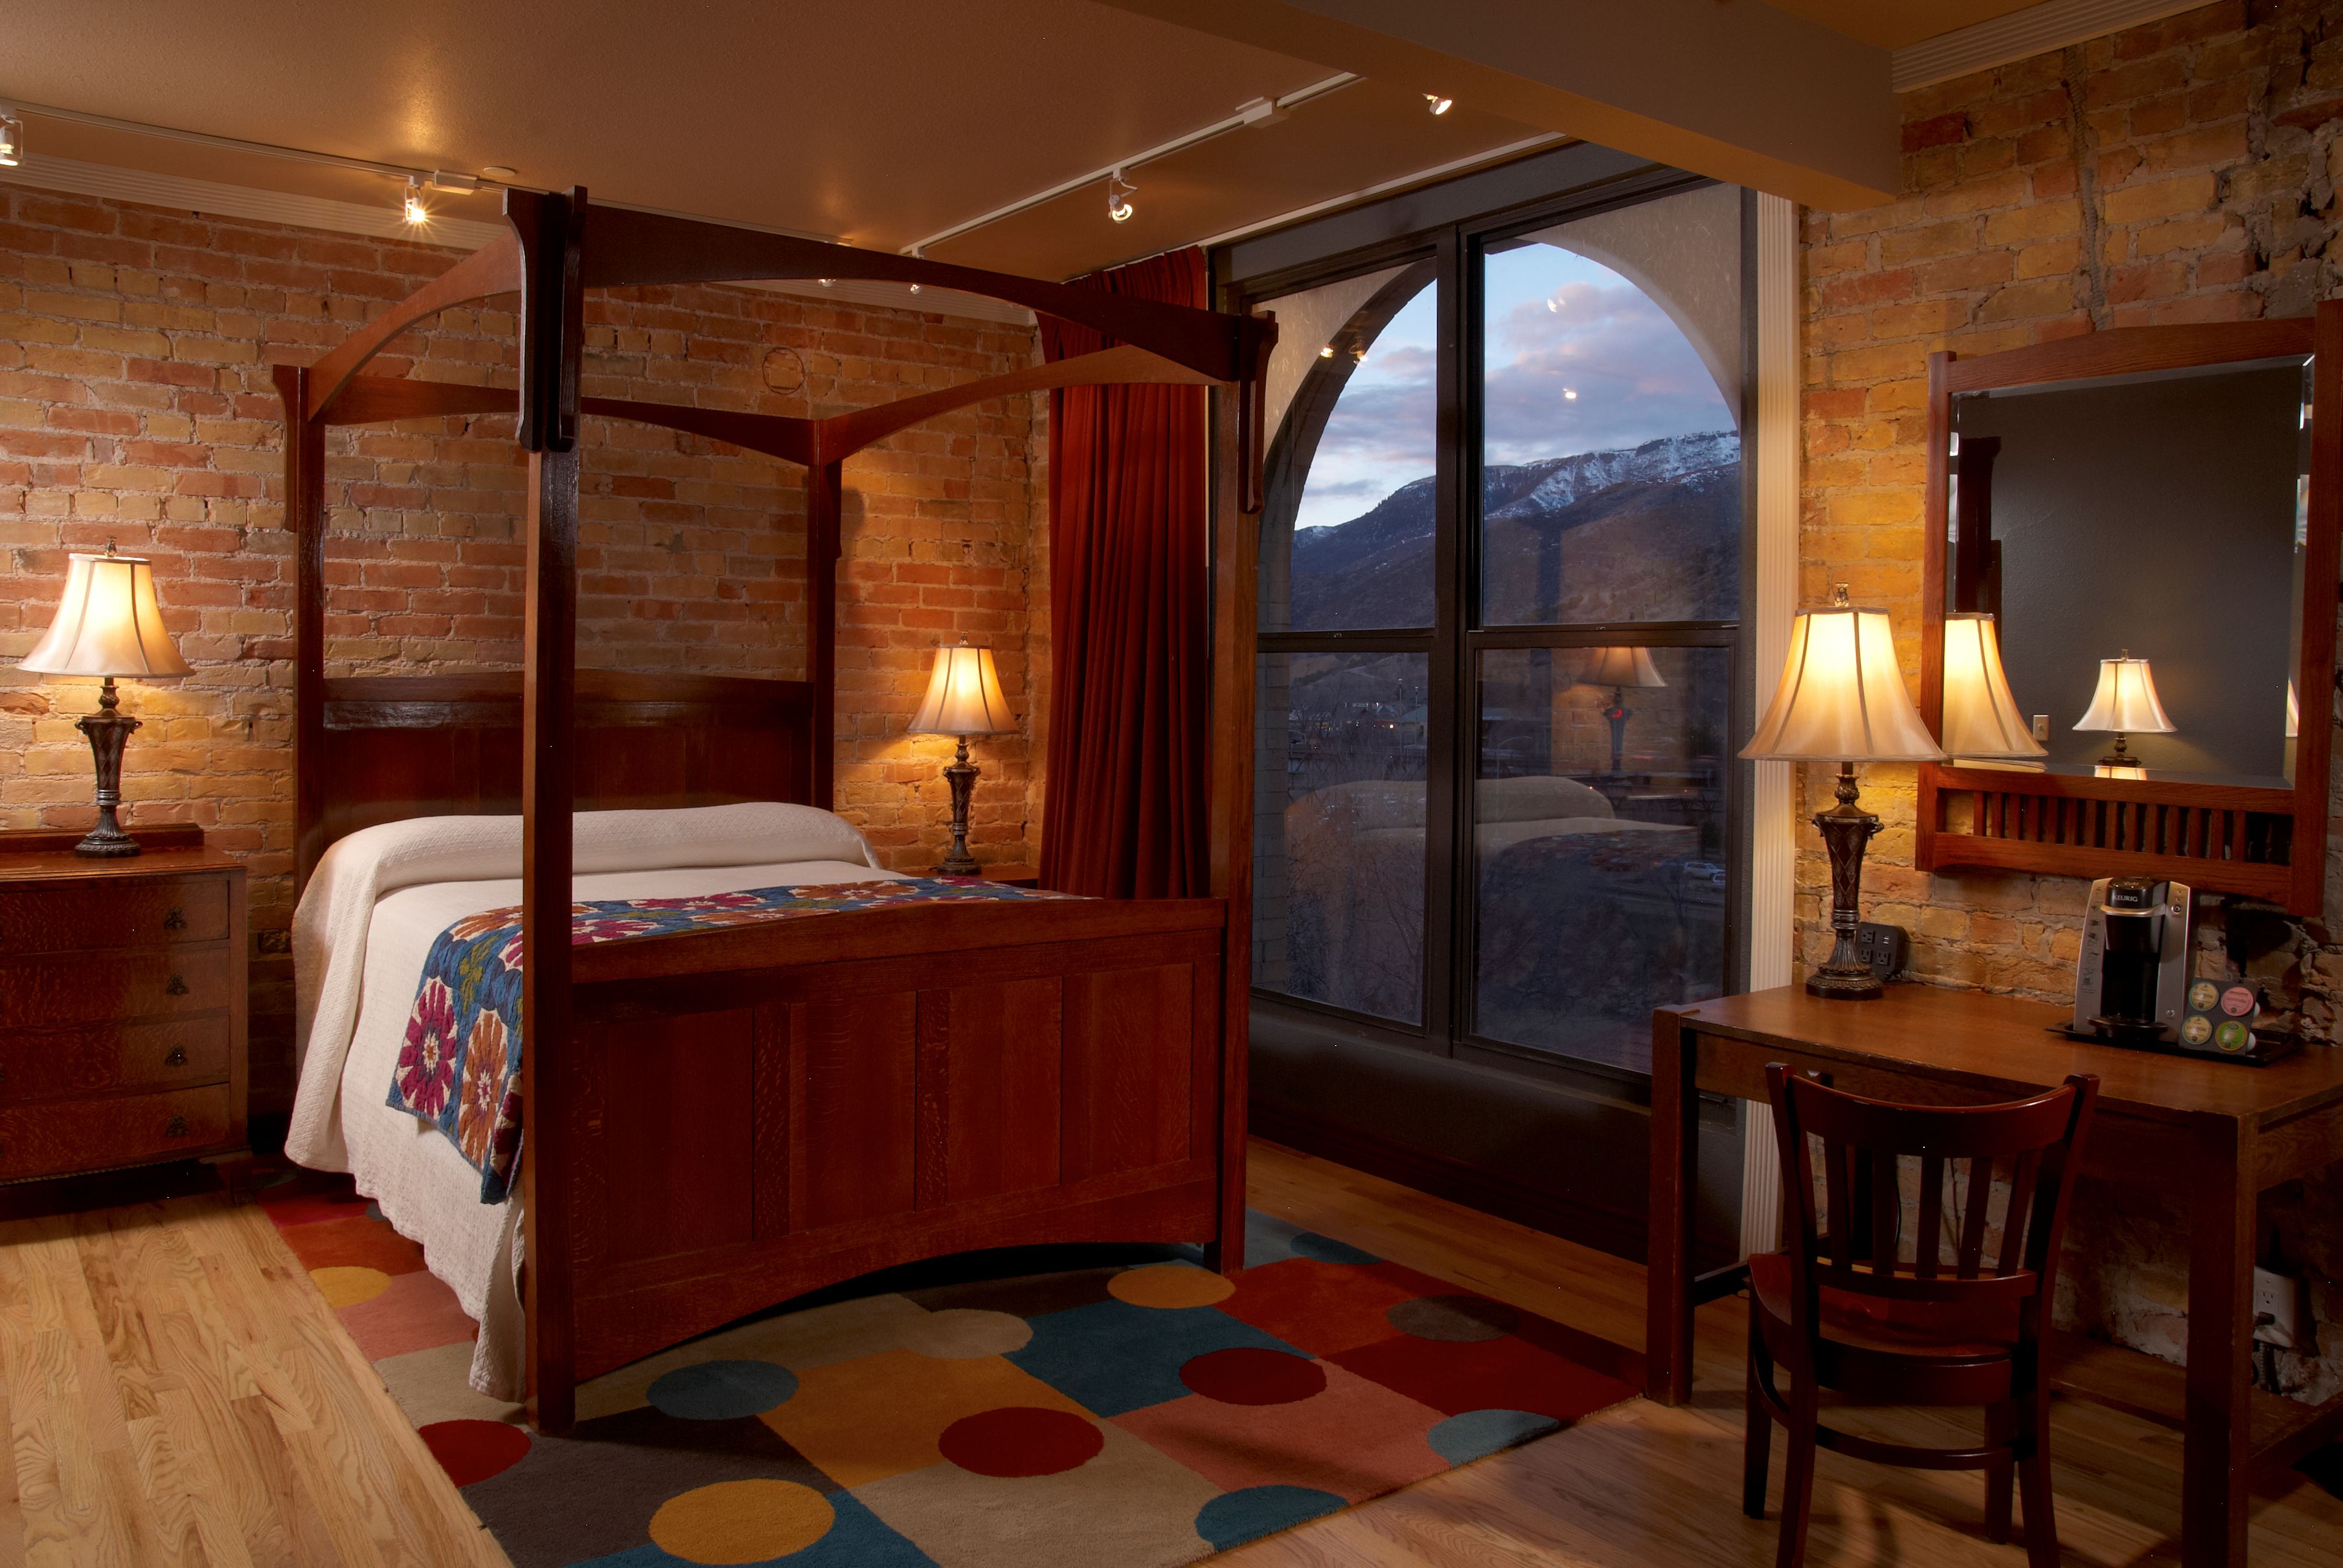 Cozy quilts and antiques warm each guest room at The Hotel Denver, which also offers modern conveniences including free wireless and high-definition televisions.